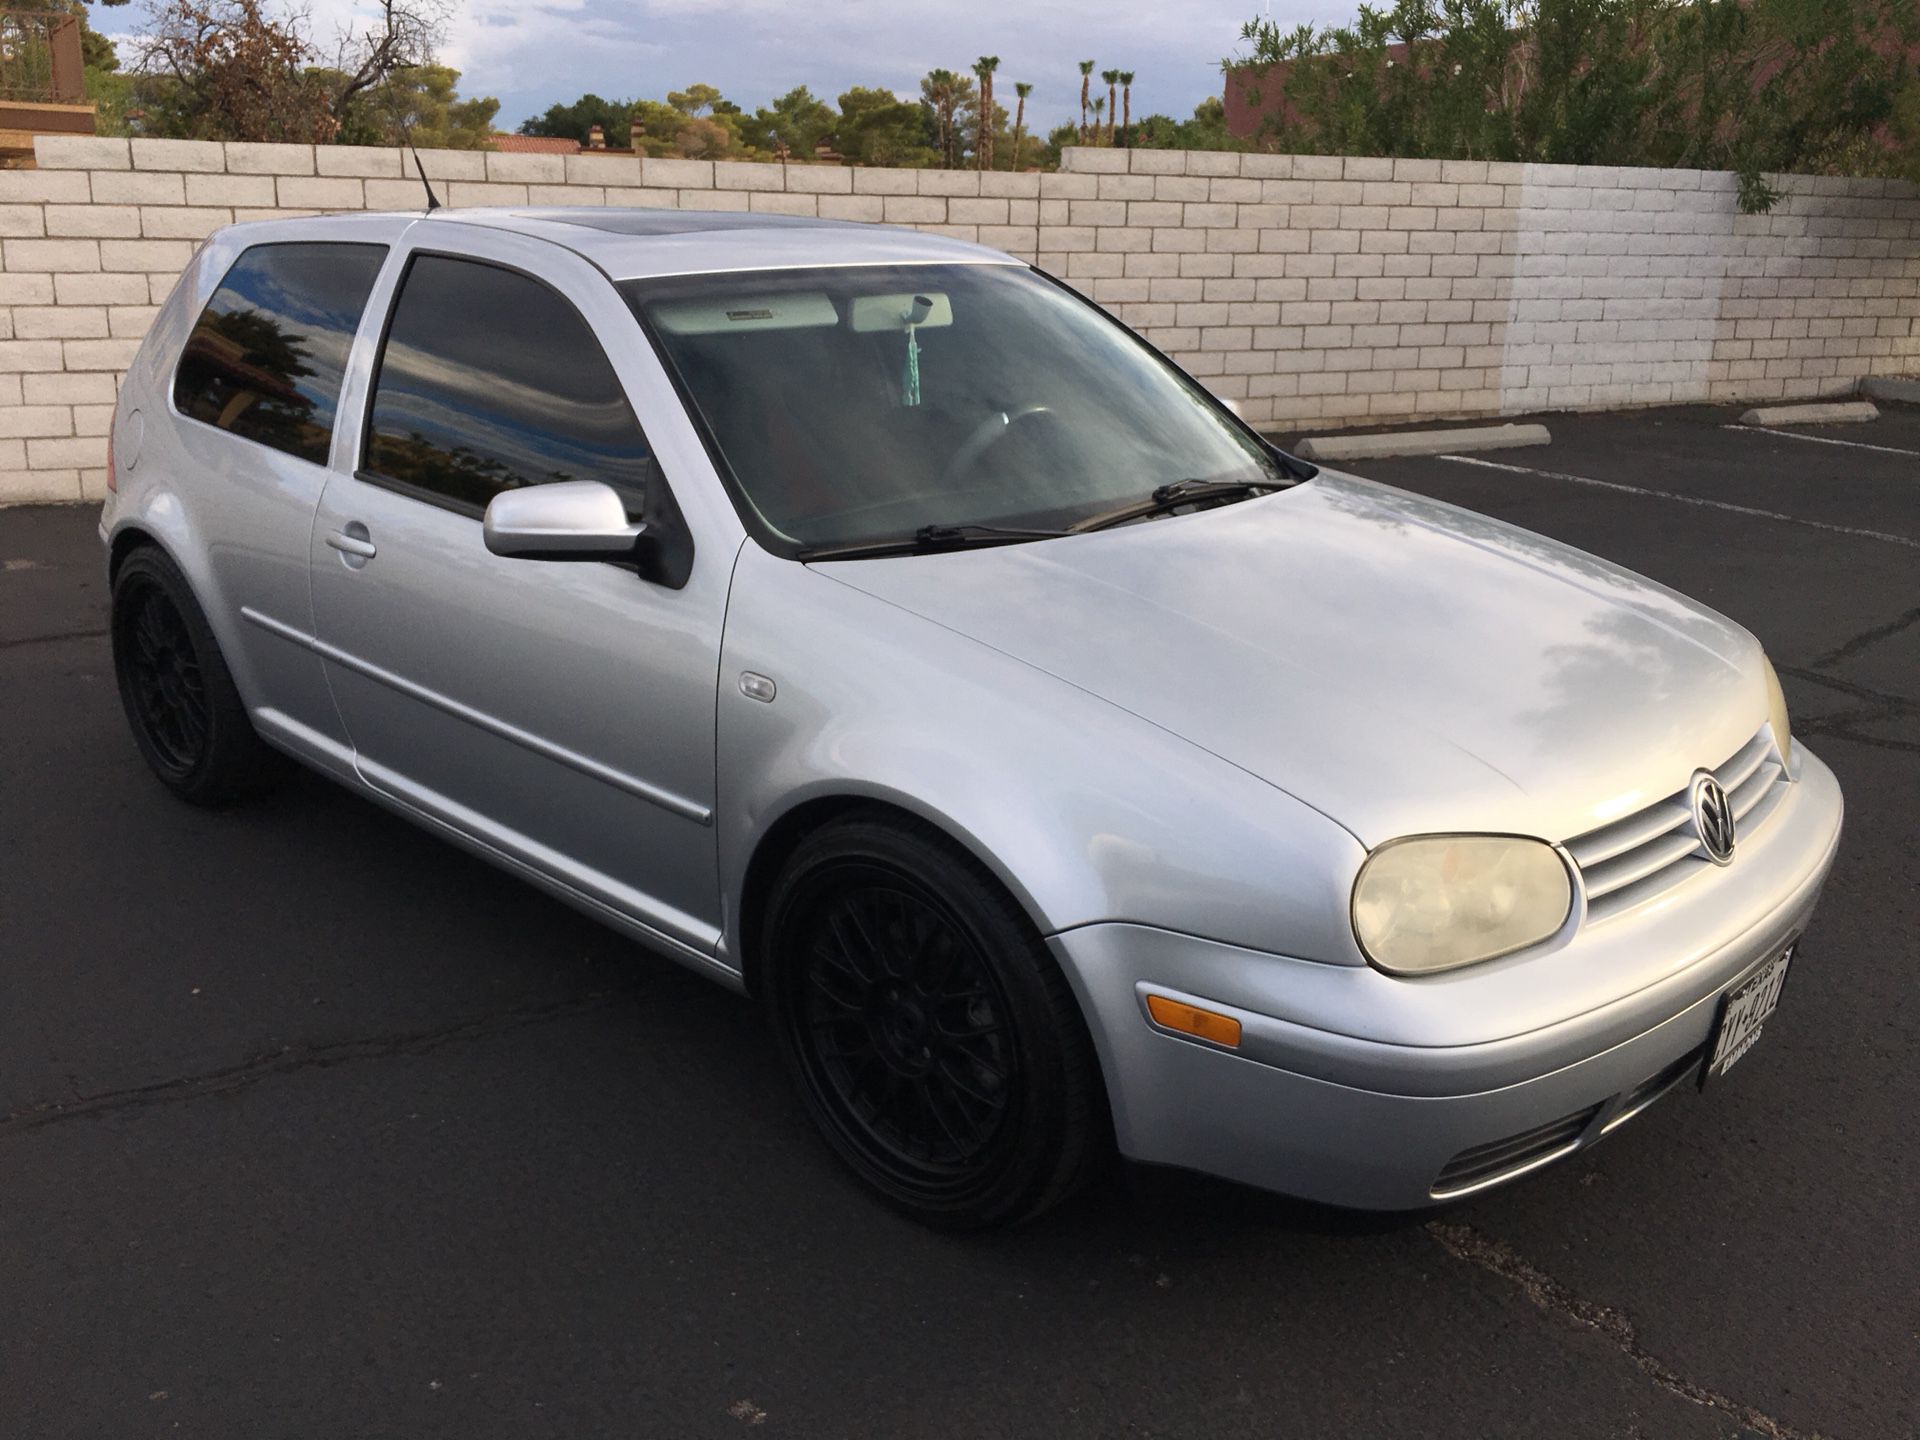 2005 Volkswagen GTI Turbo Automatic Transmission slipping but can drive